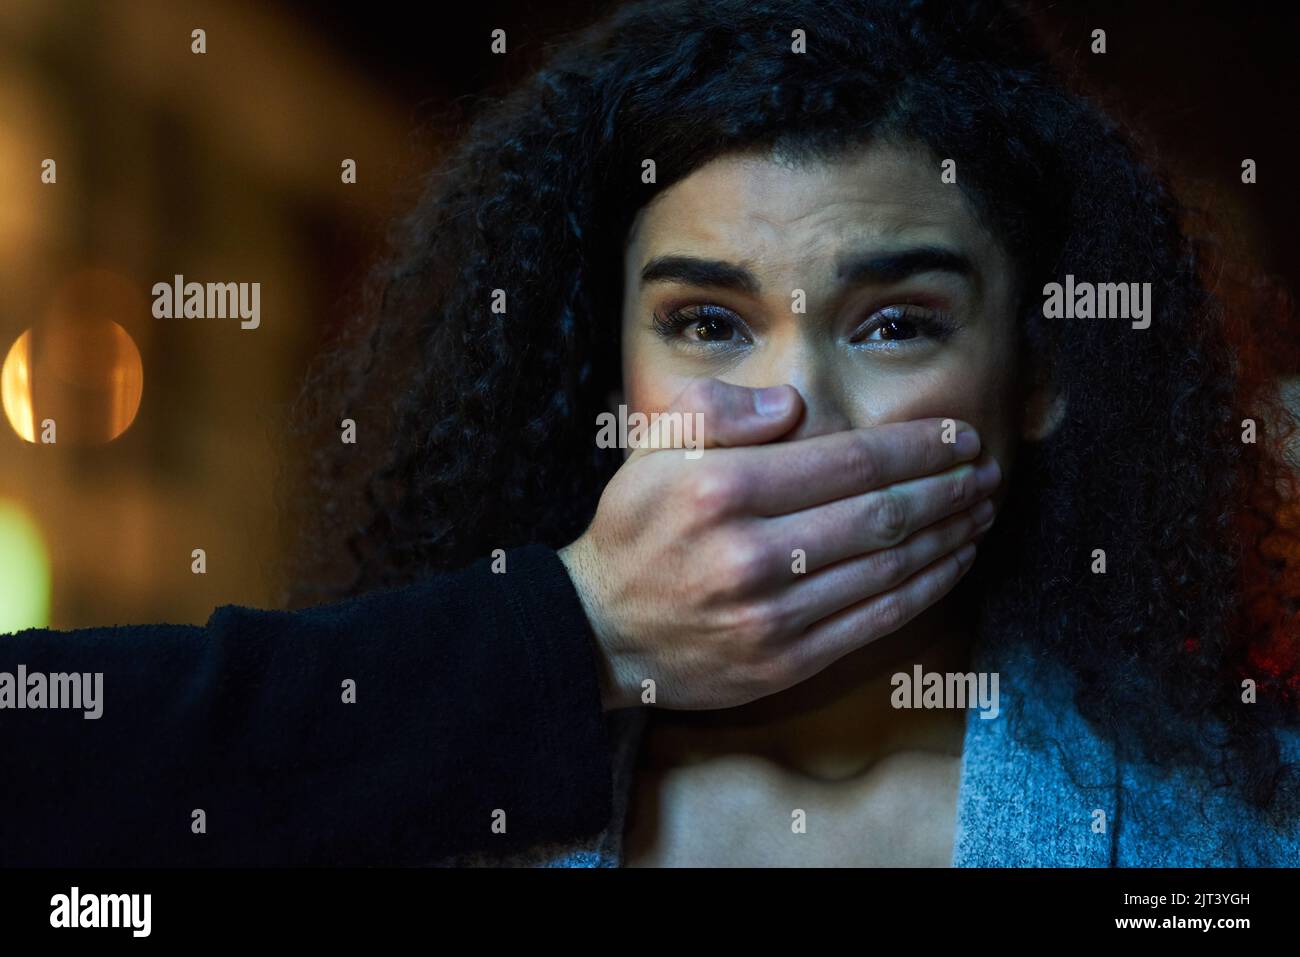 Its a moment that leaves you completely defenceless. Portrait of a frightened young woman with her assailants hand over her mouth. Stock Photo